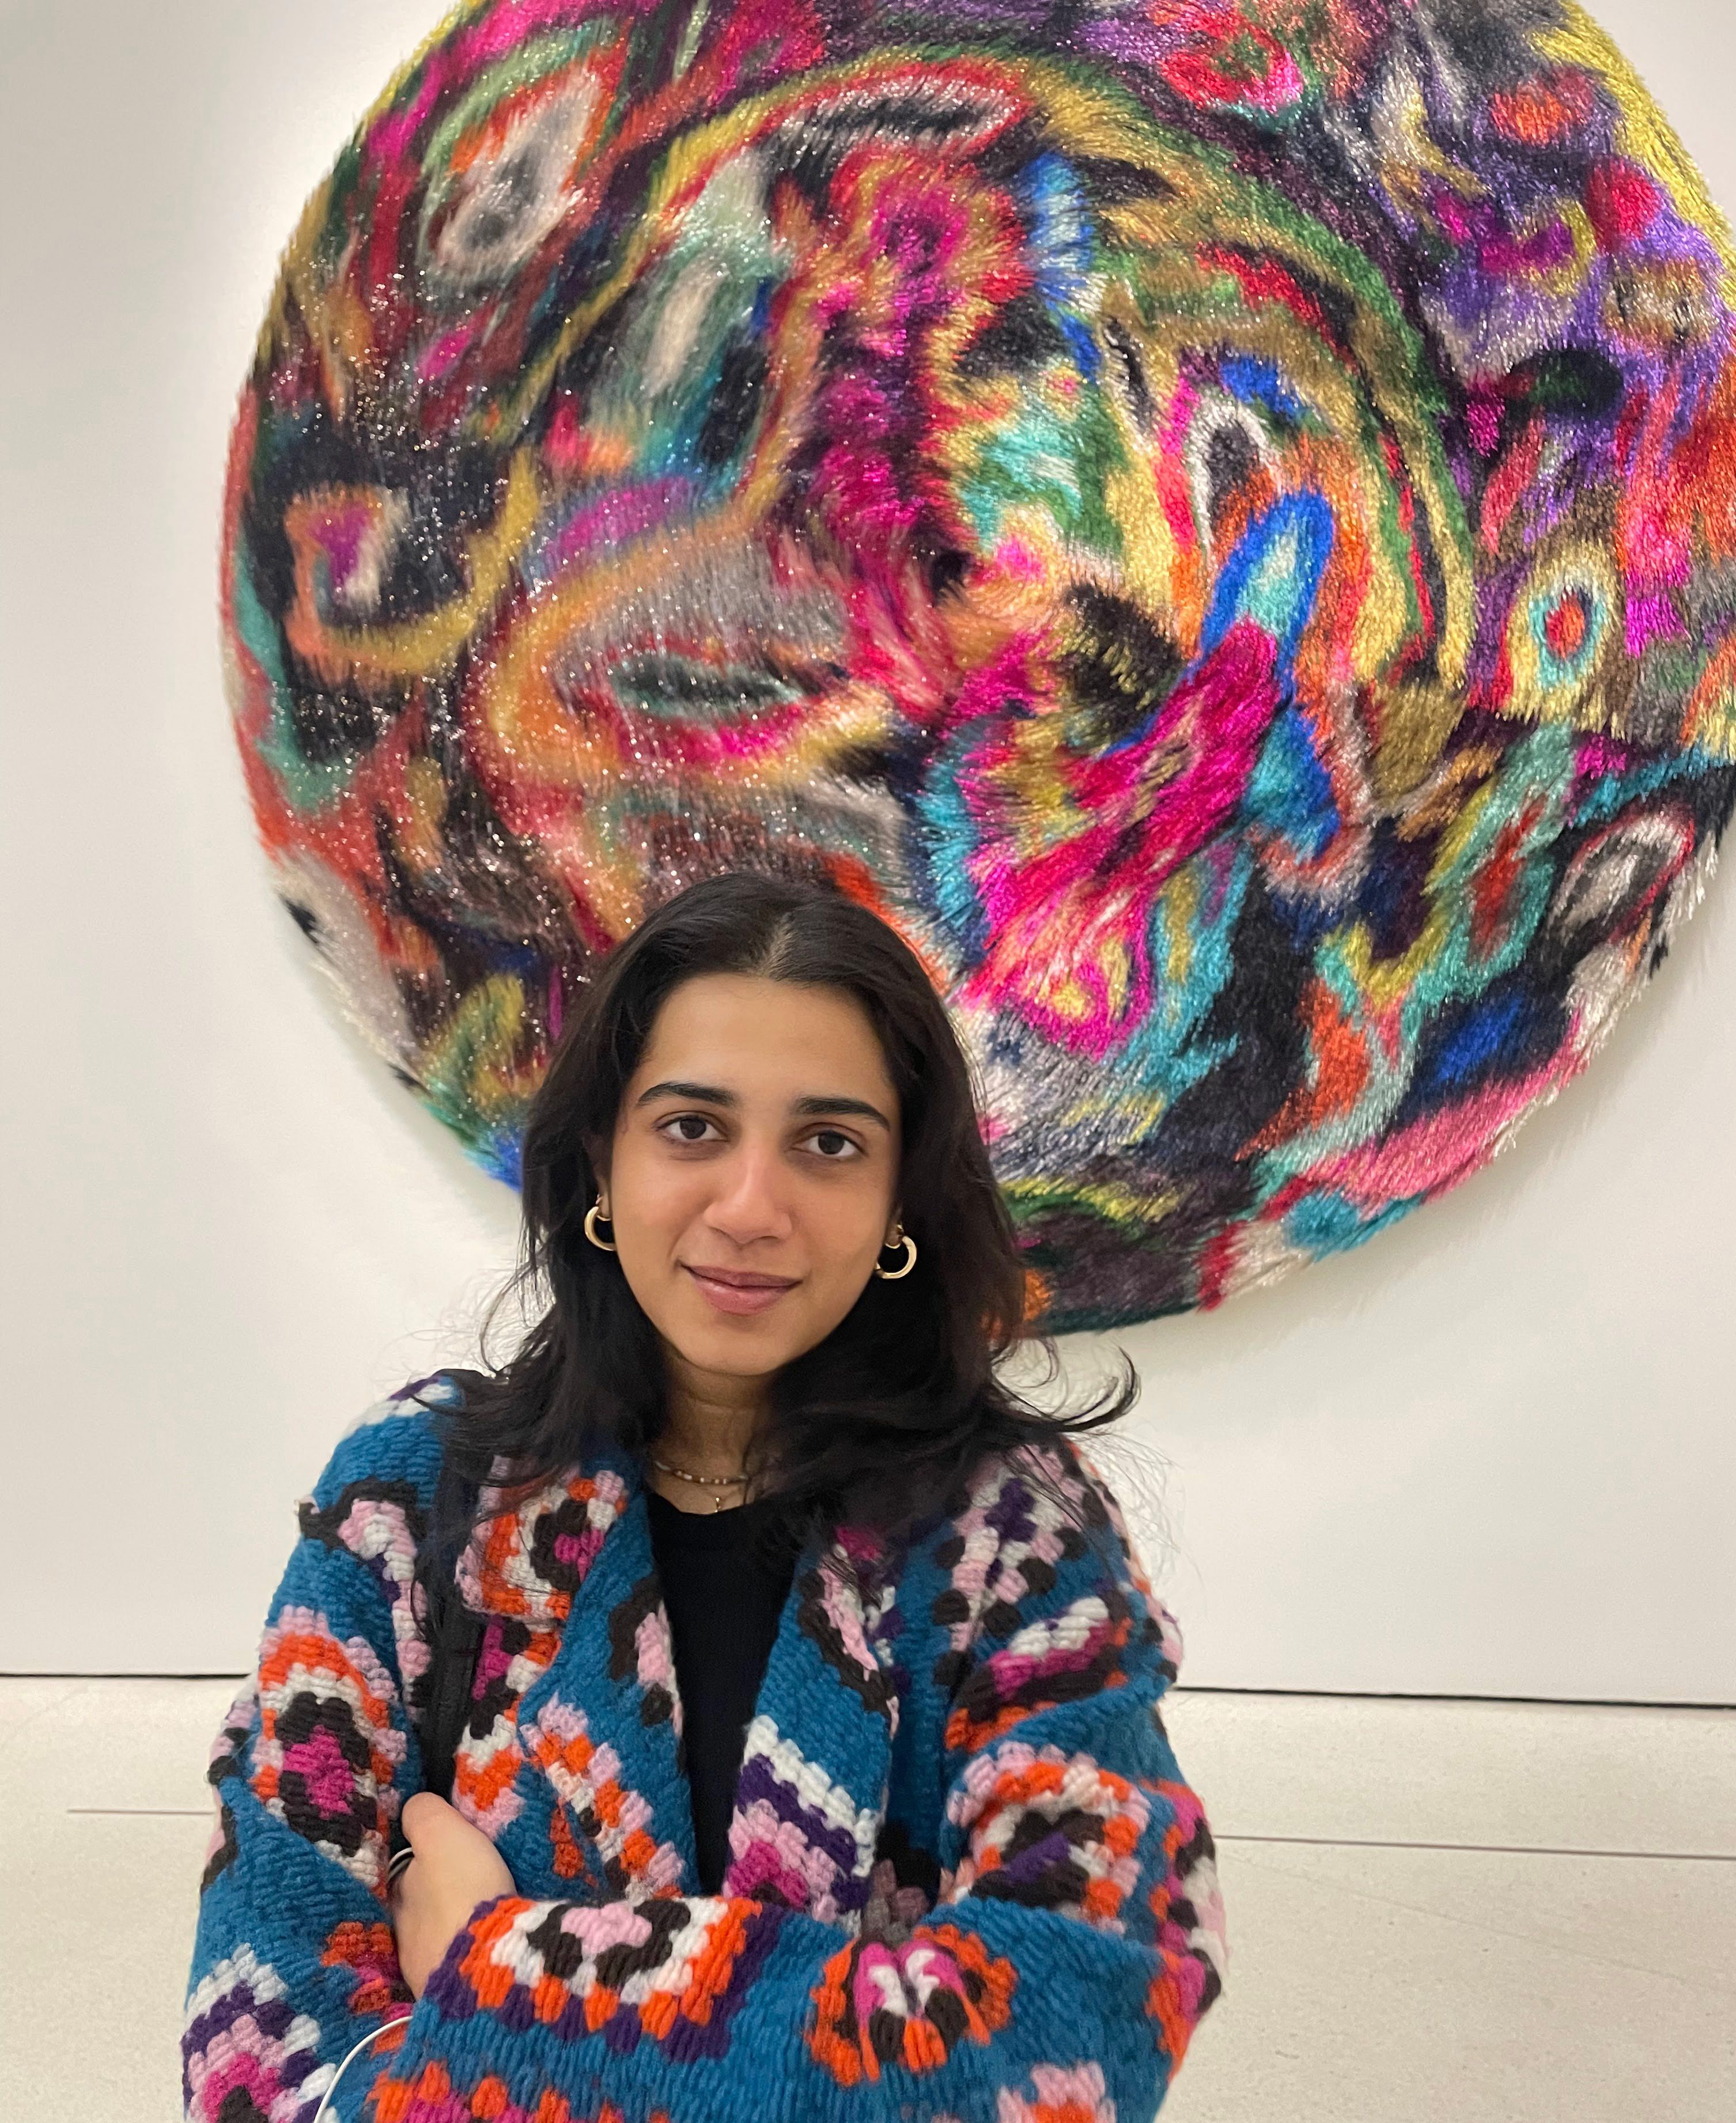 Tanya Malhotra stands in front of a colorful plus abstract artwork